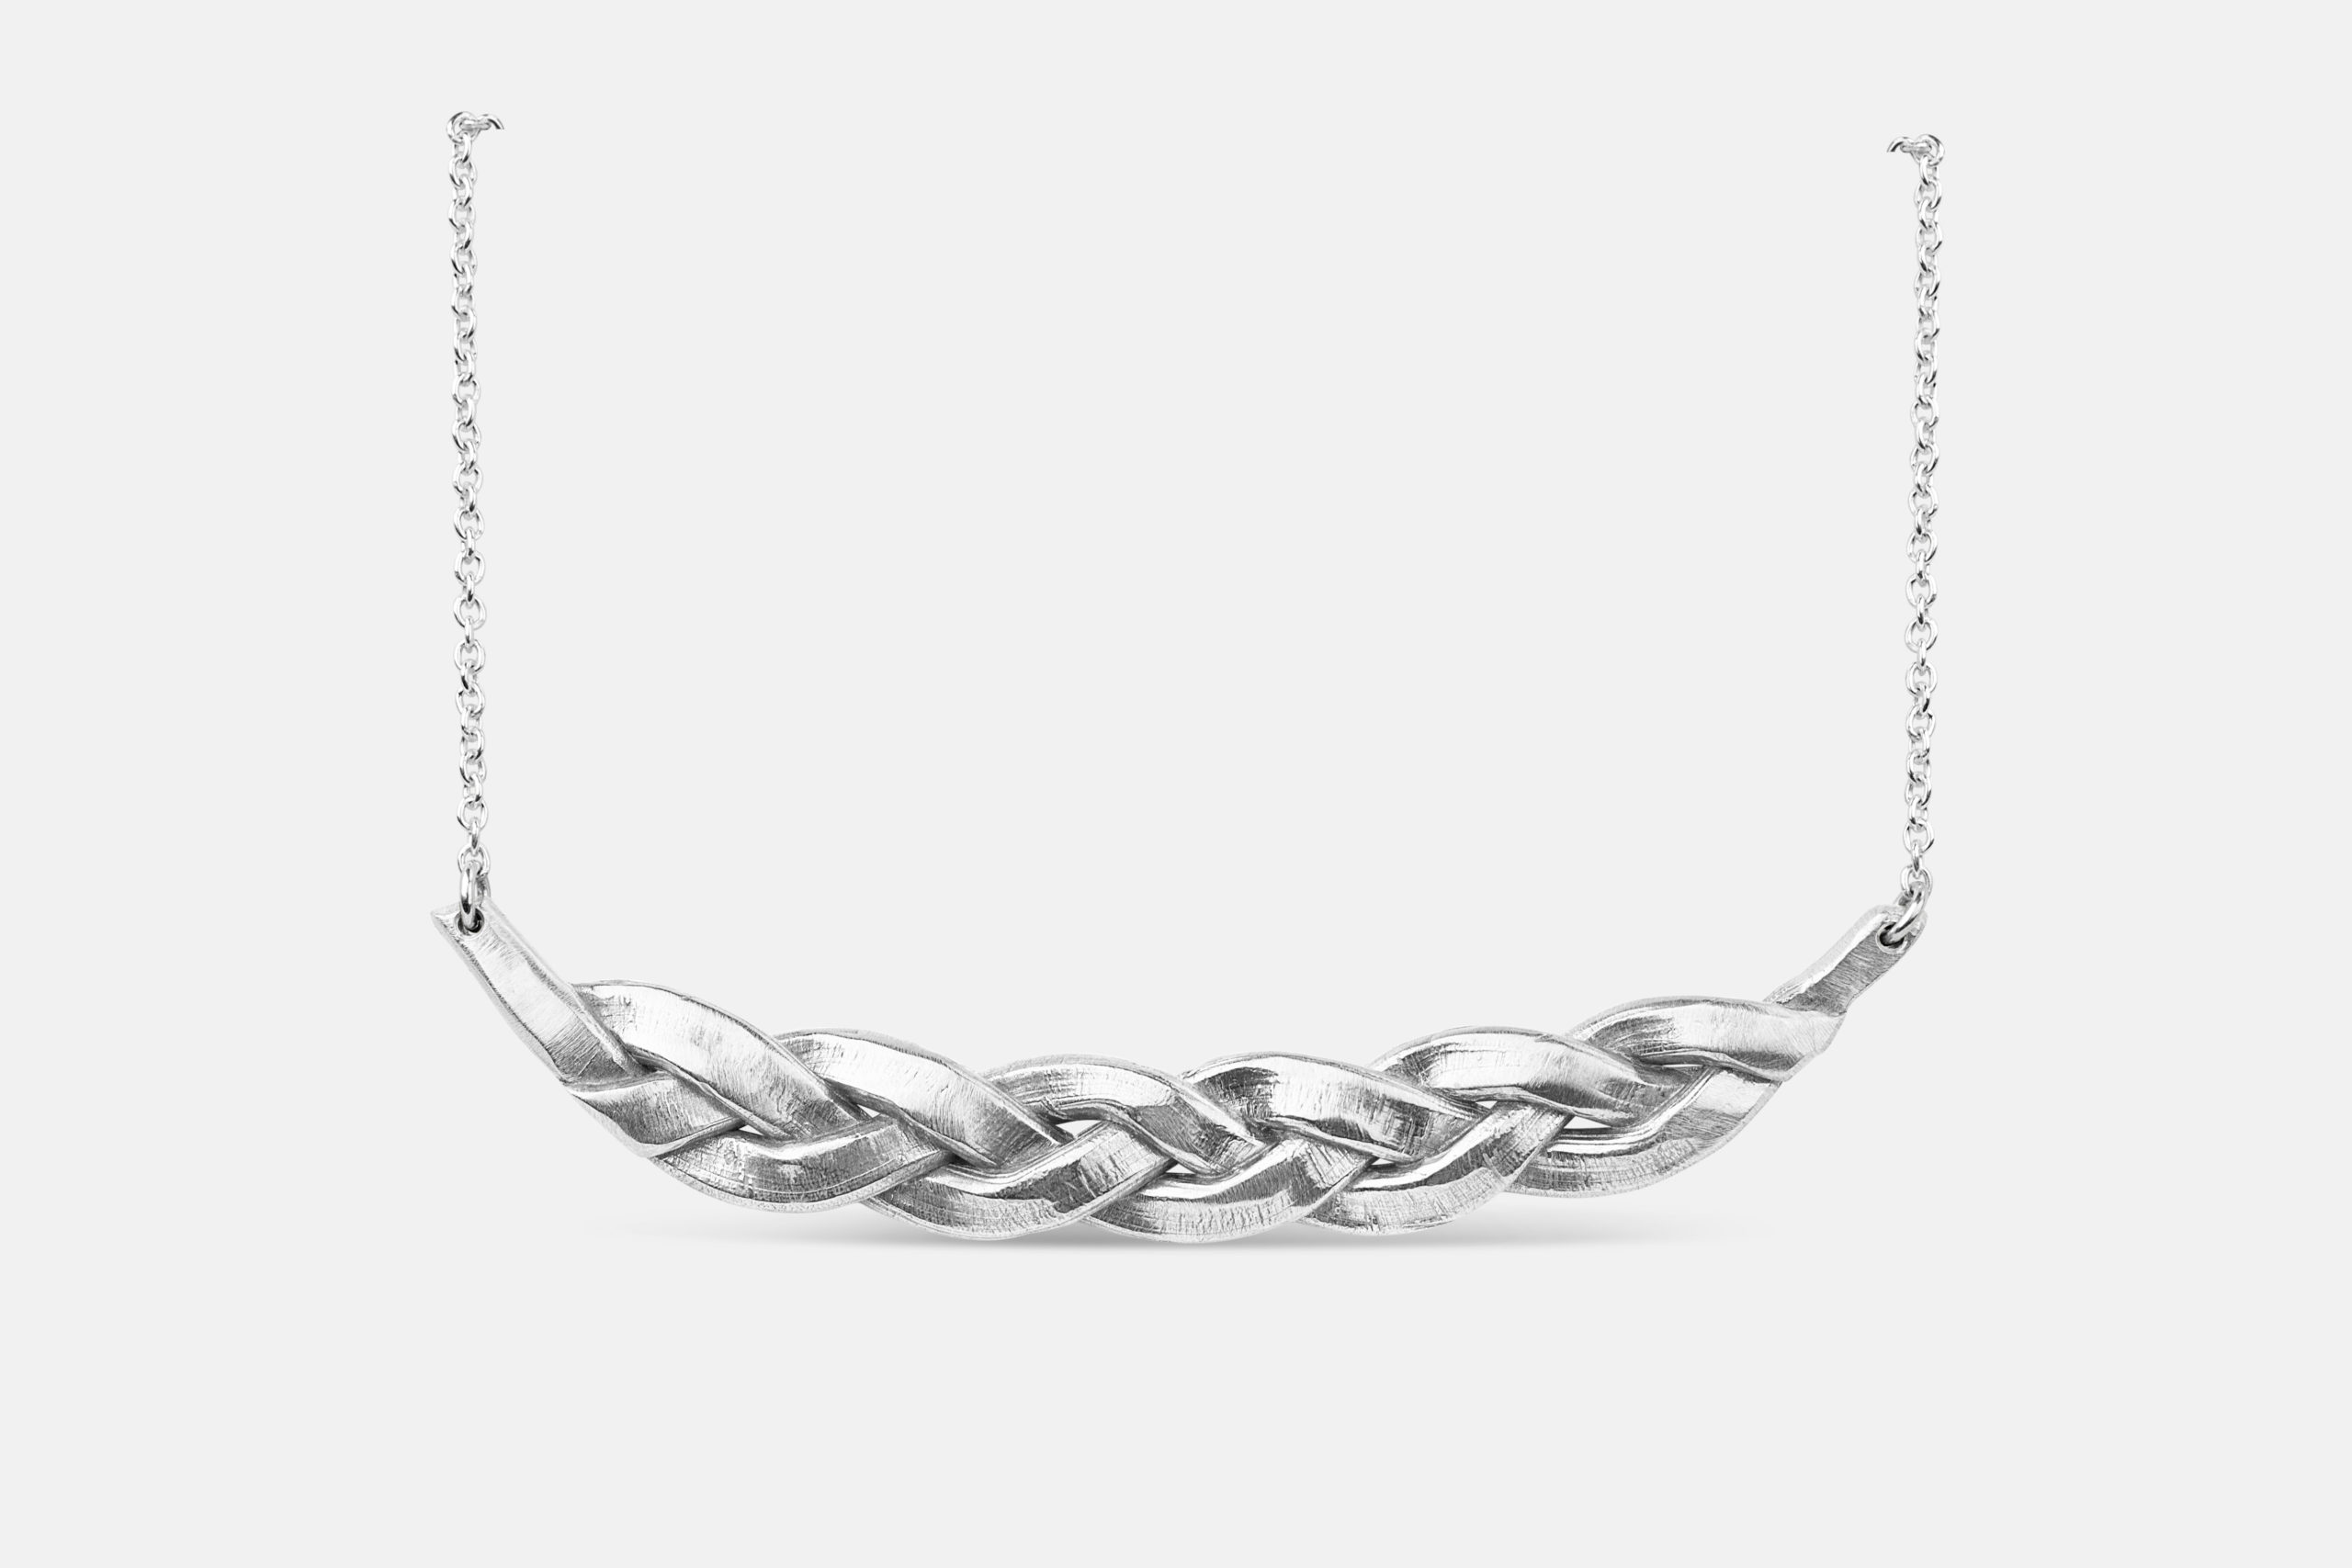 Batur Braided necklace in Silver